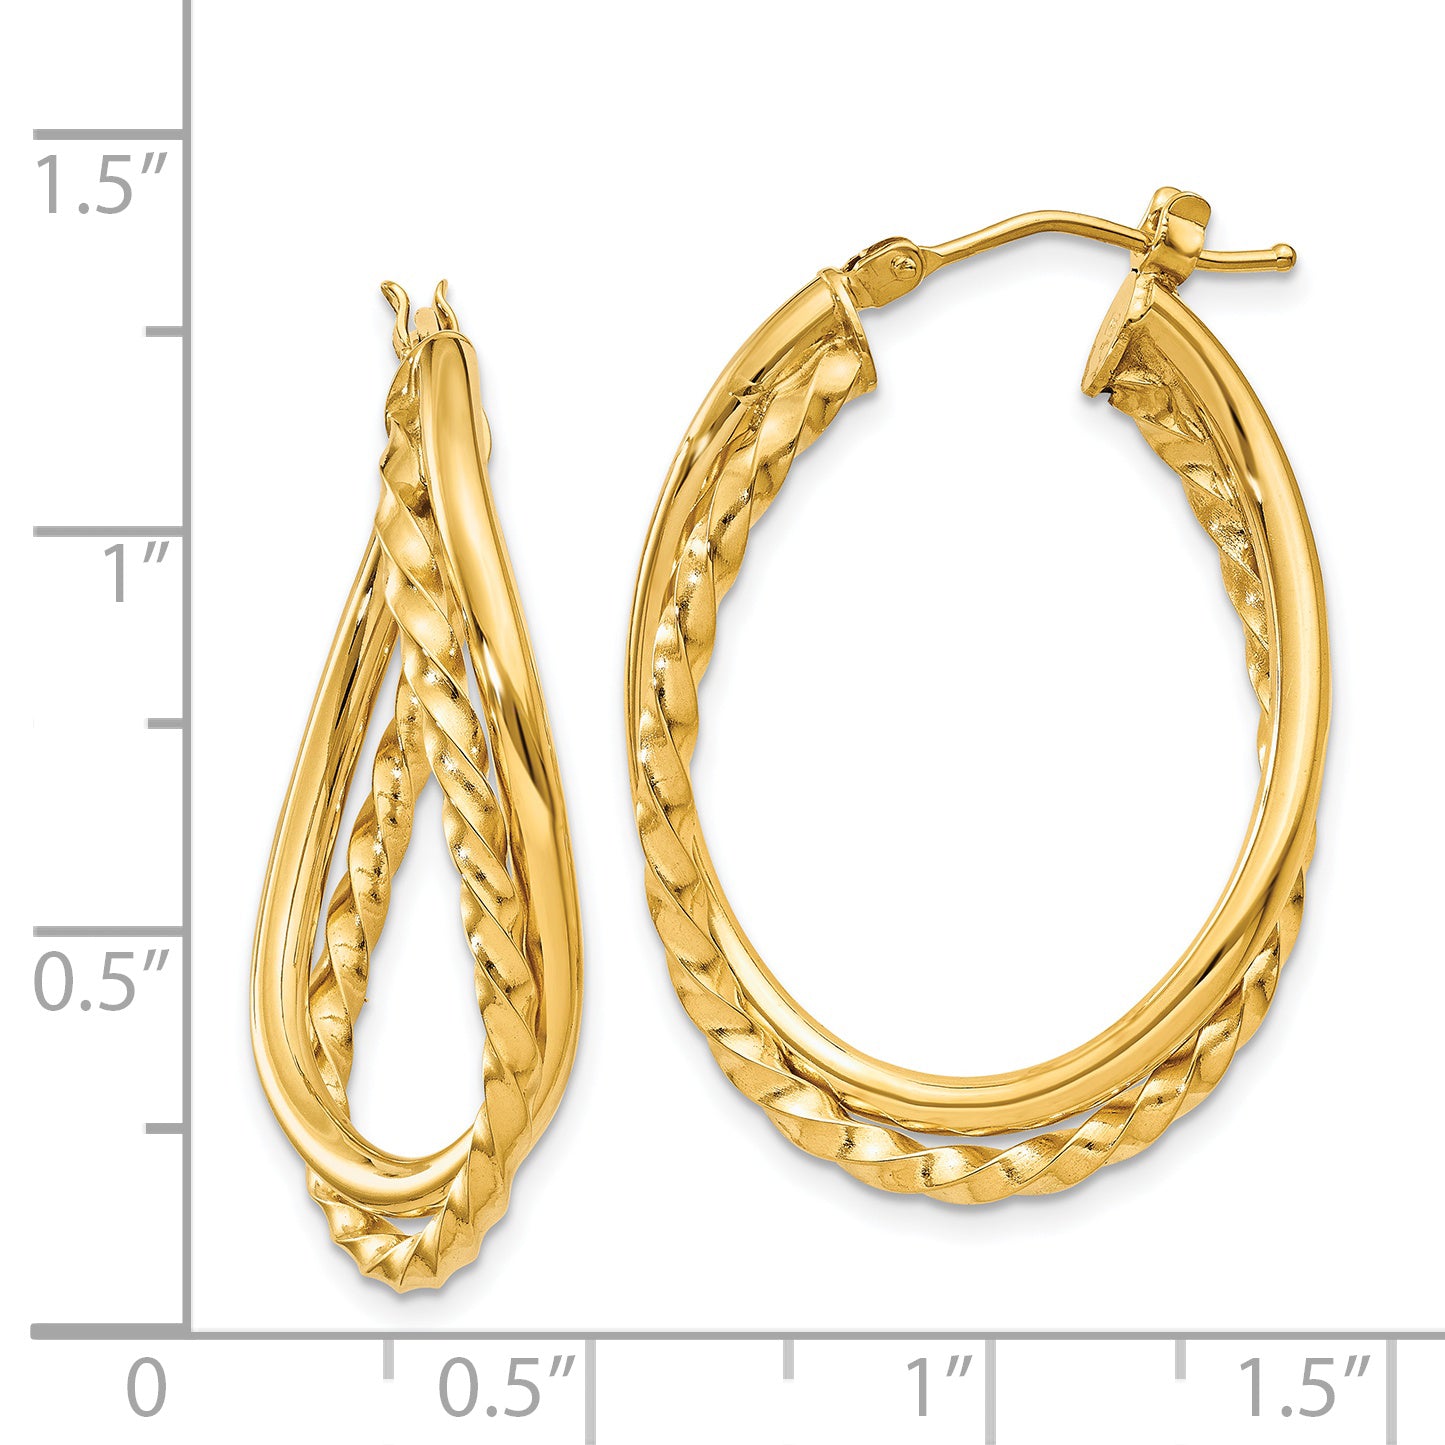 14k Textured and Polished Twist Oval Hoop Earrings